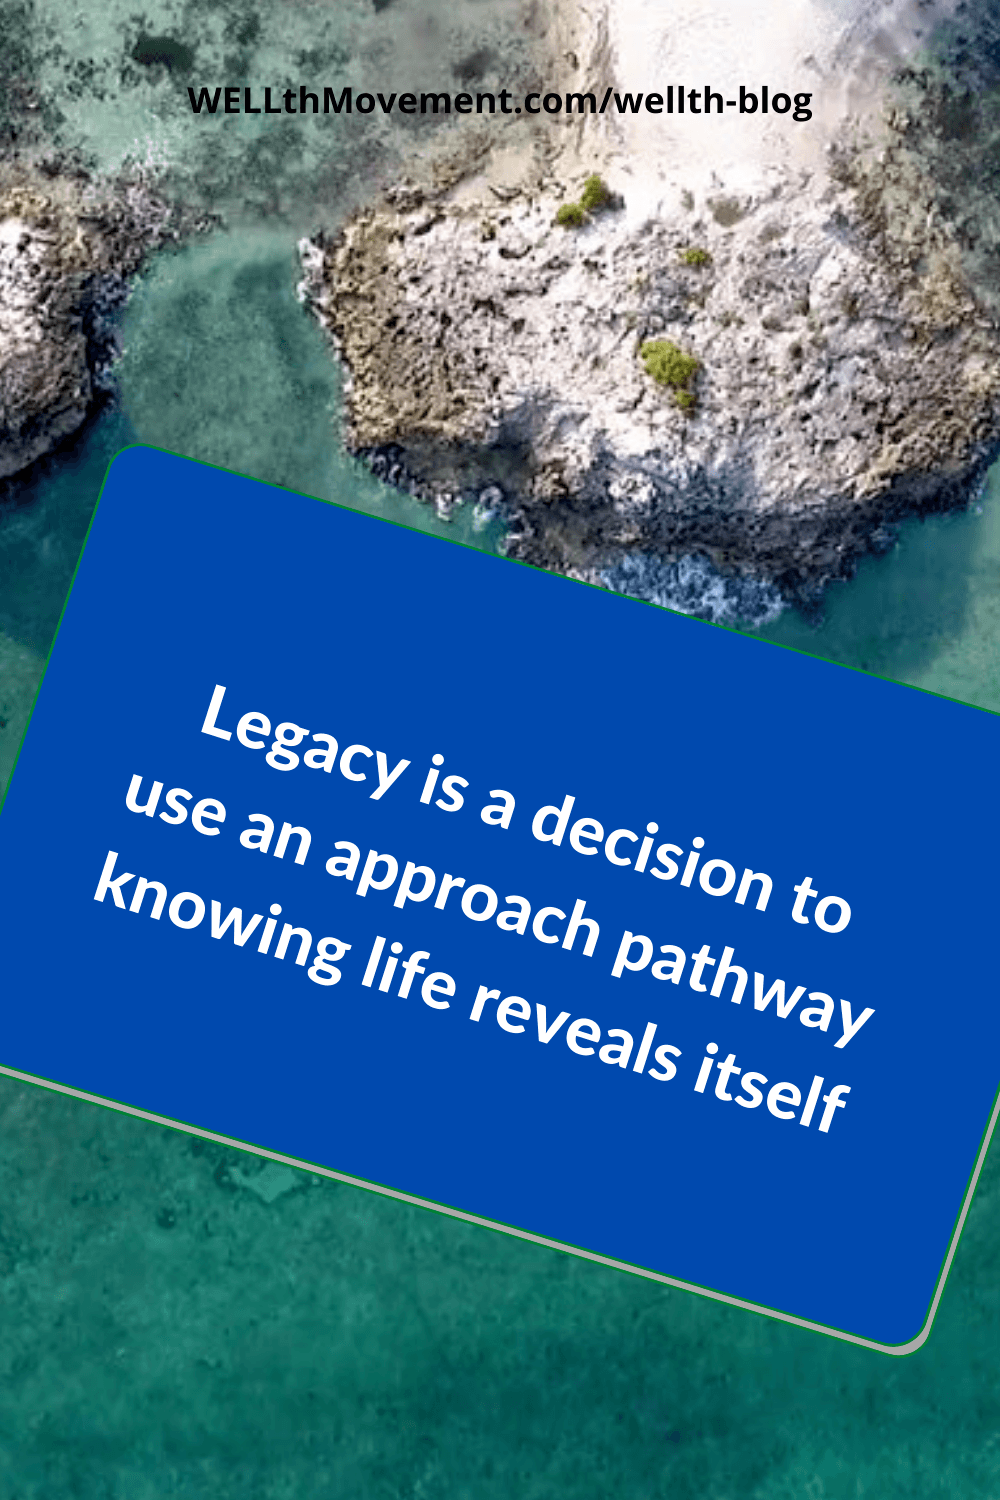 Legacy Project Approach Pathway